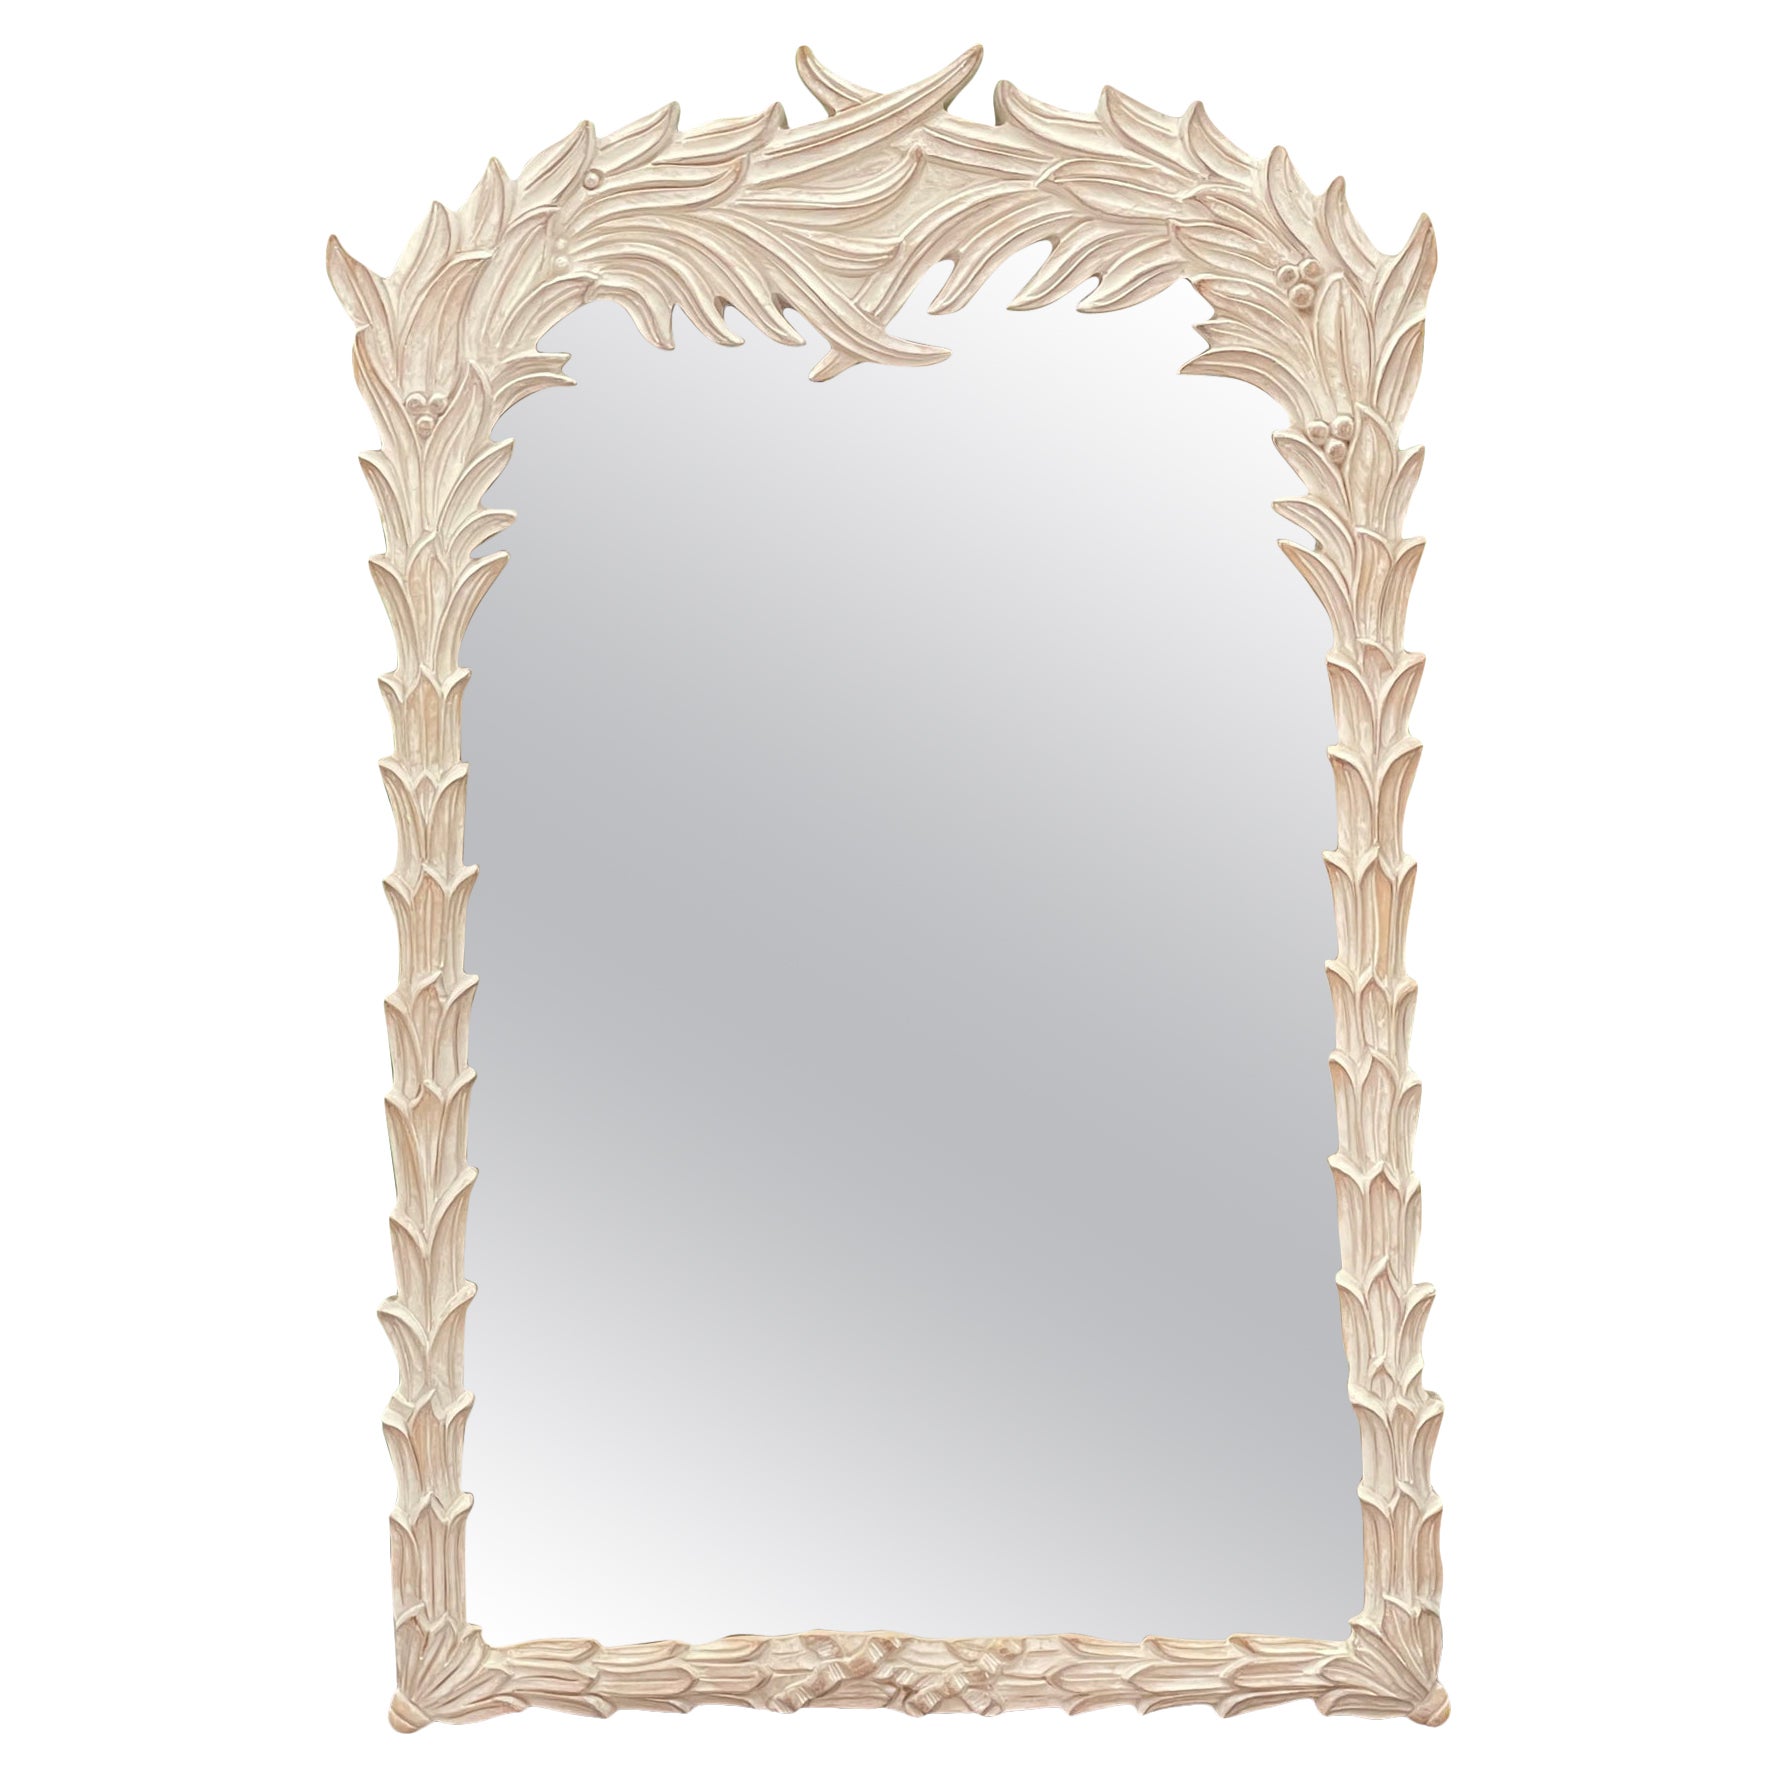 Serge Roche Style Carved Palm Frond Mirror